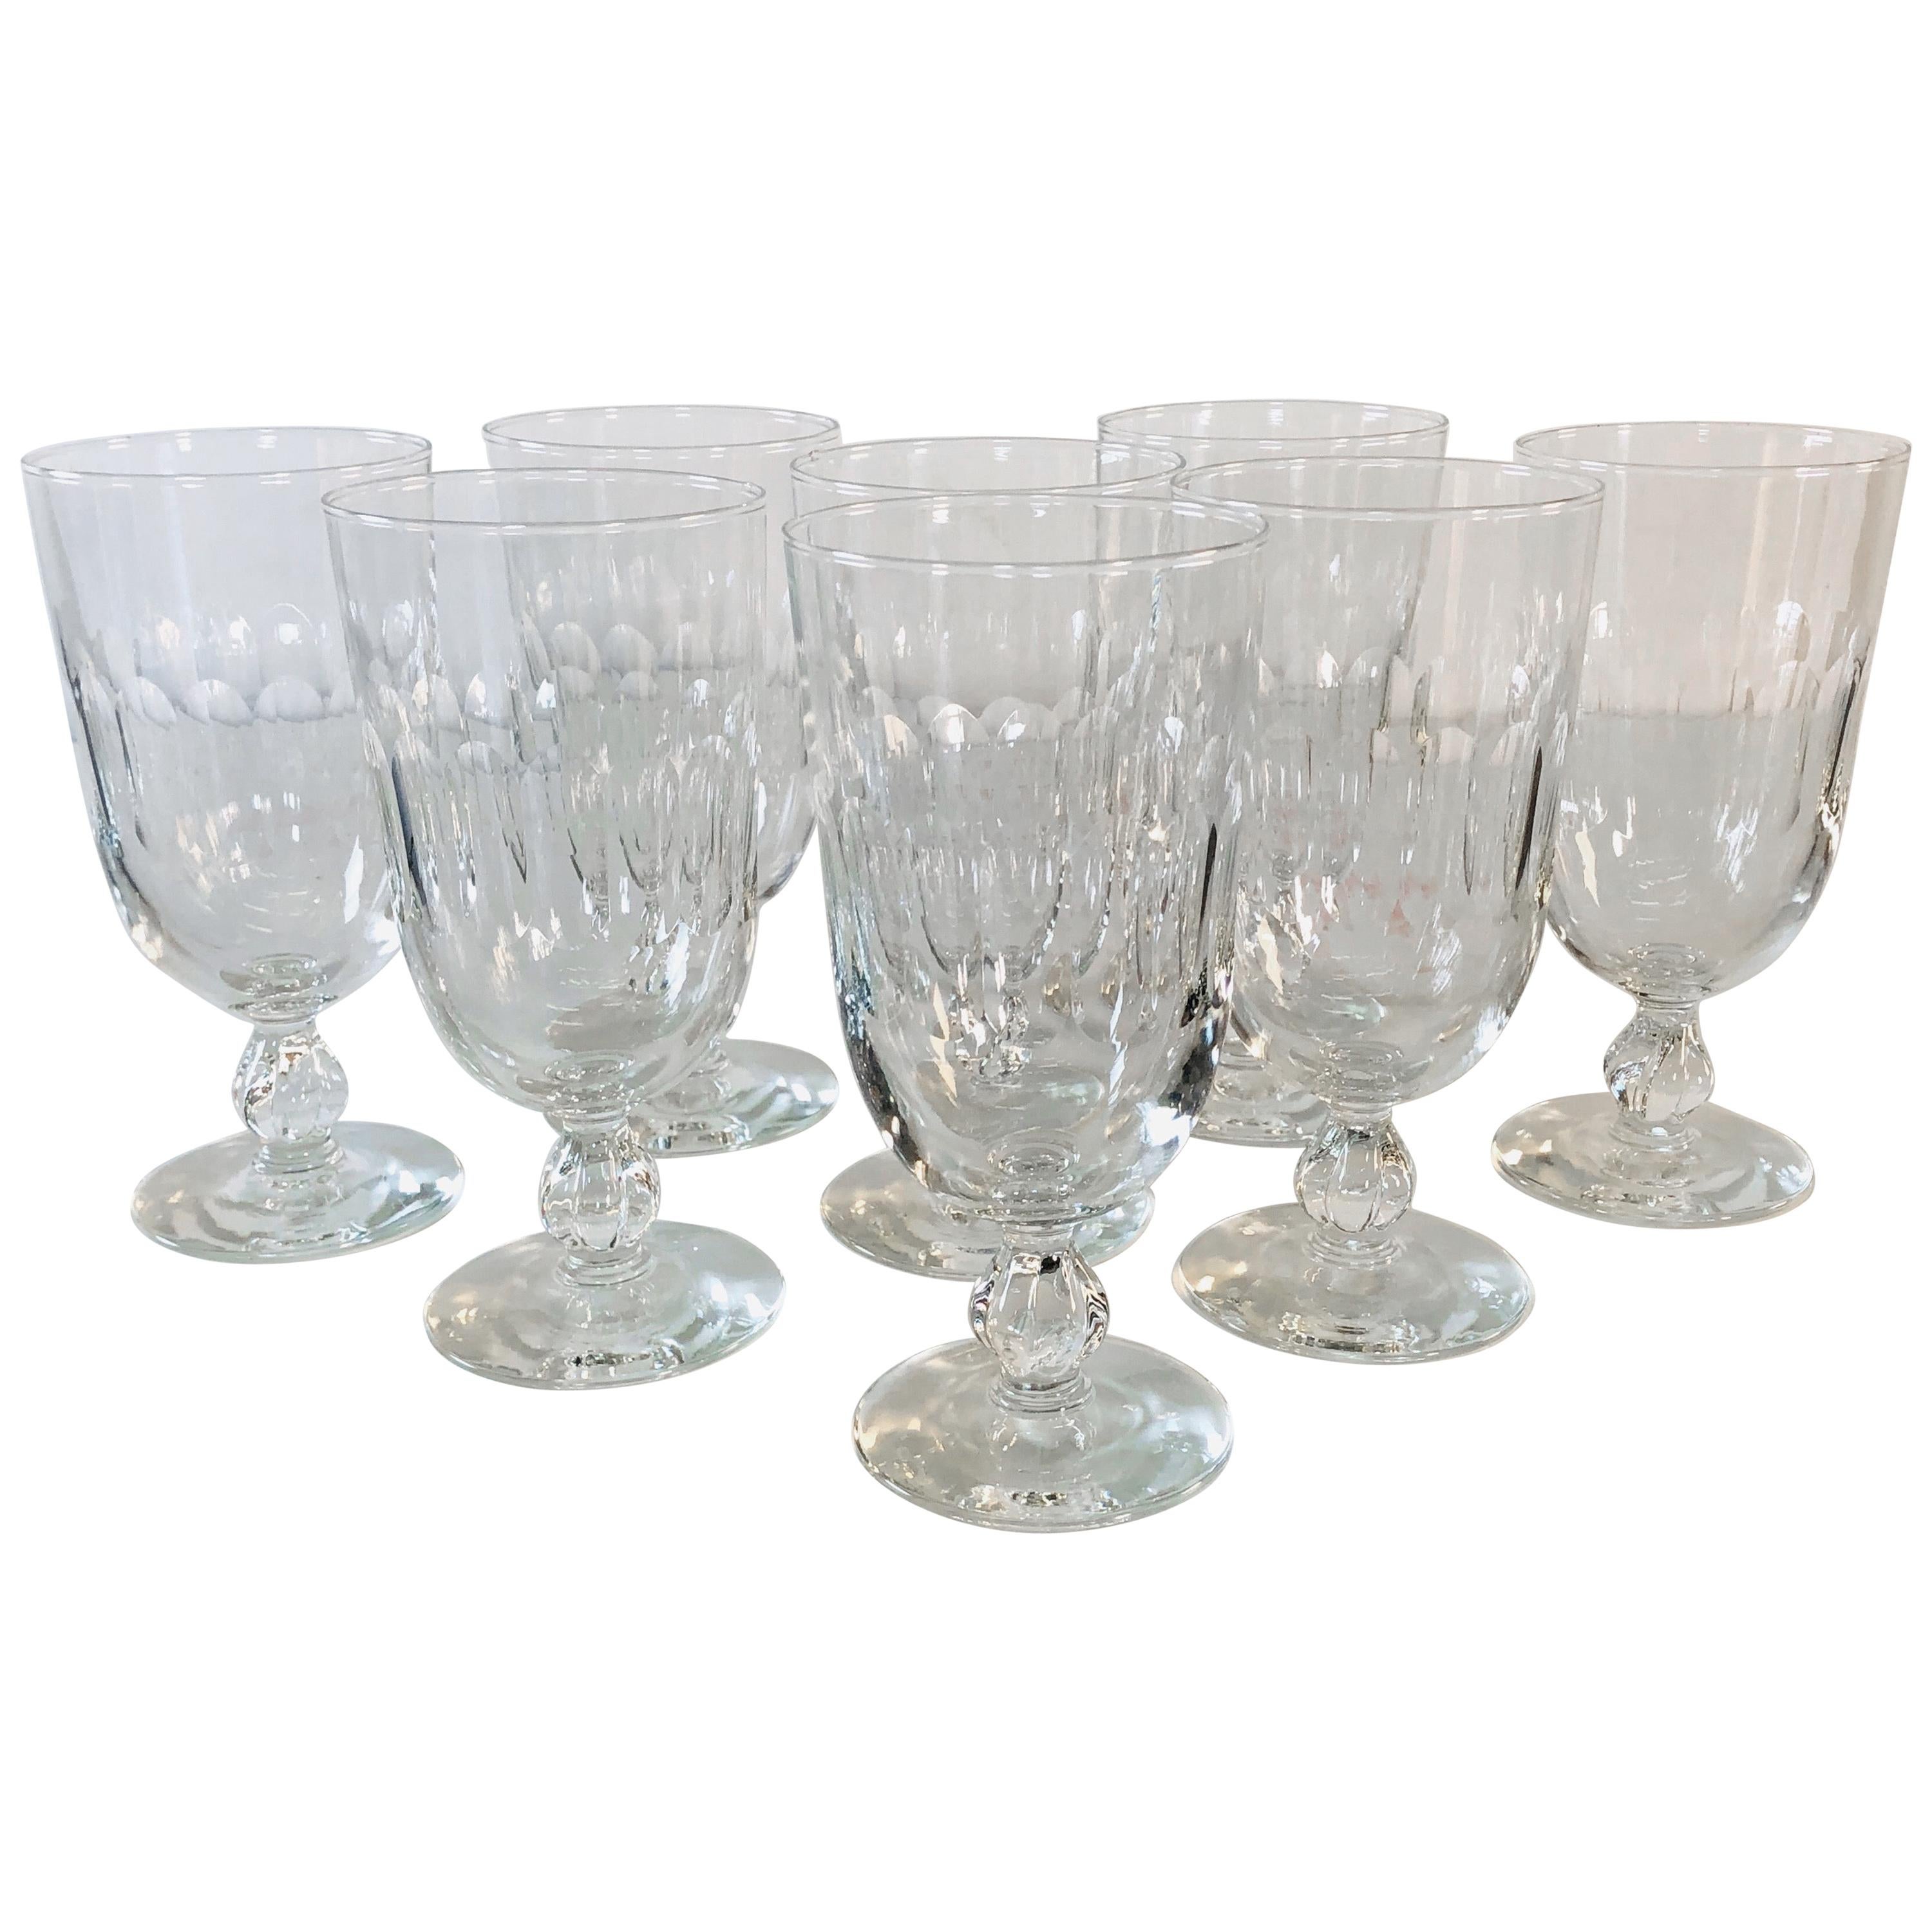 1950s Mitred Tall Glass Water Stems, Set of 8